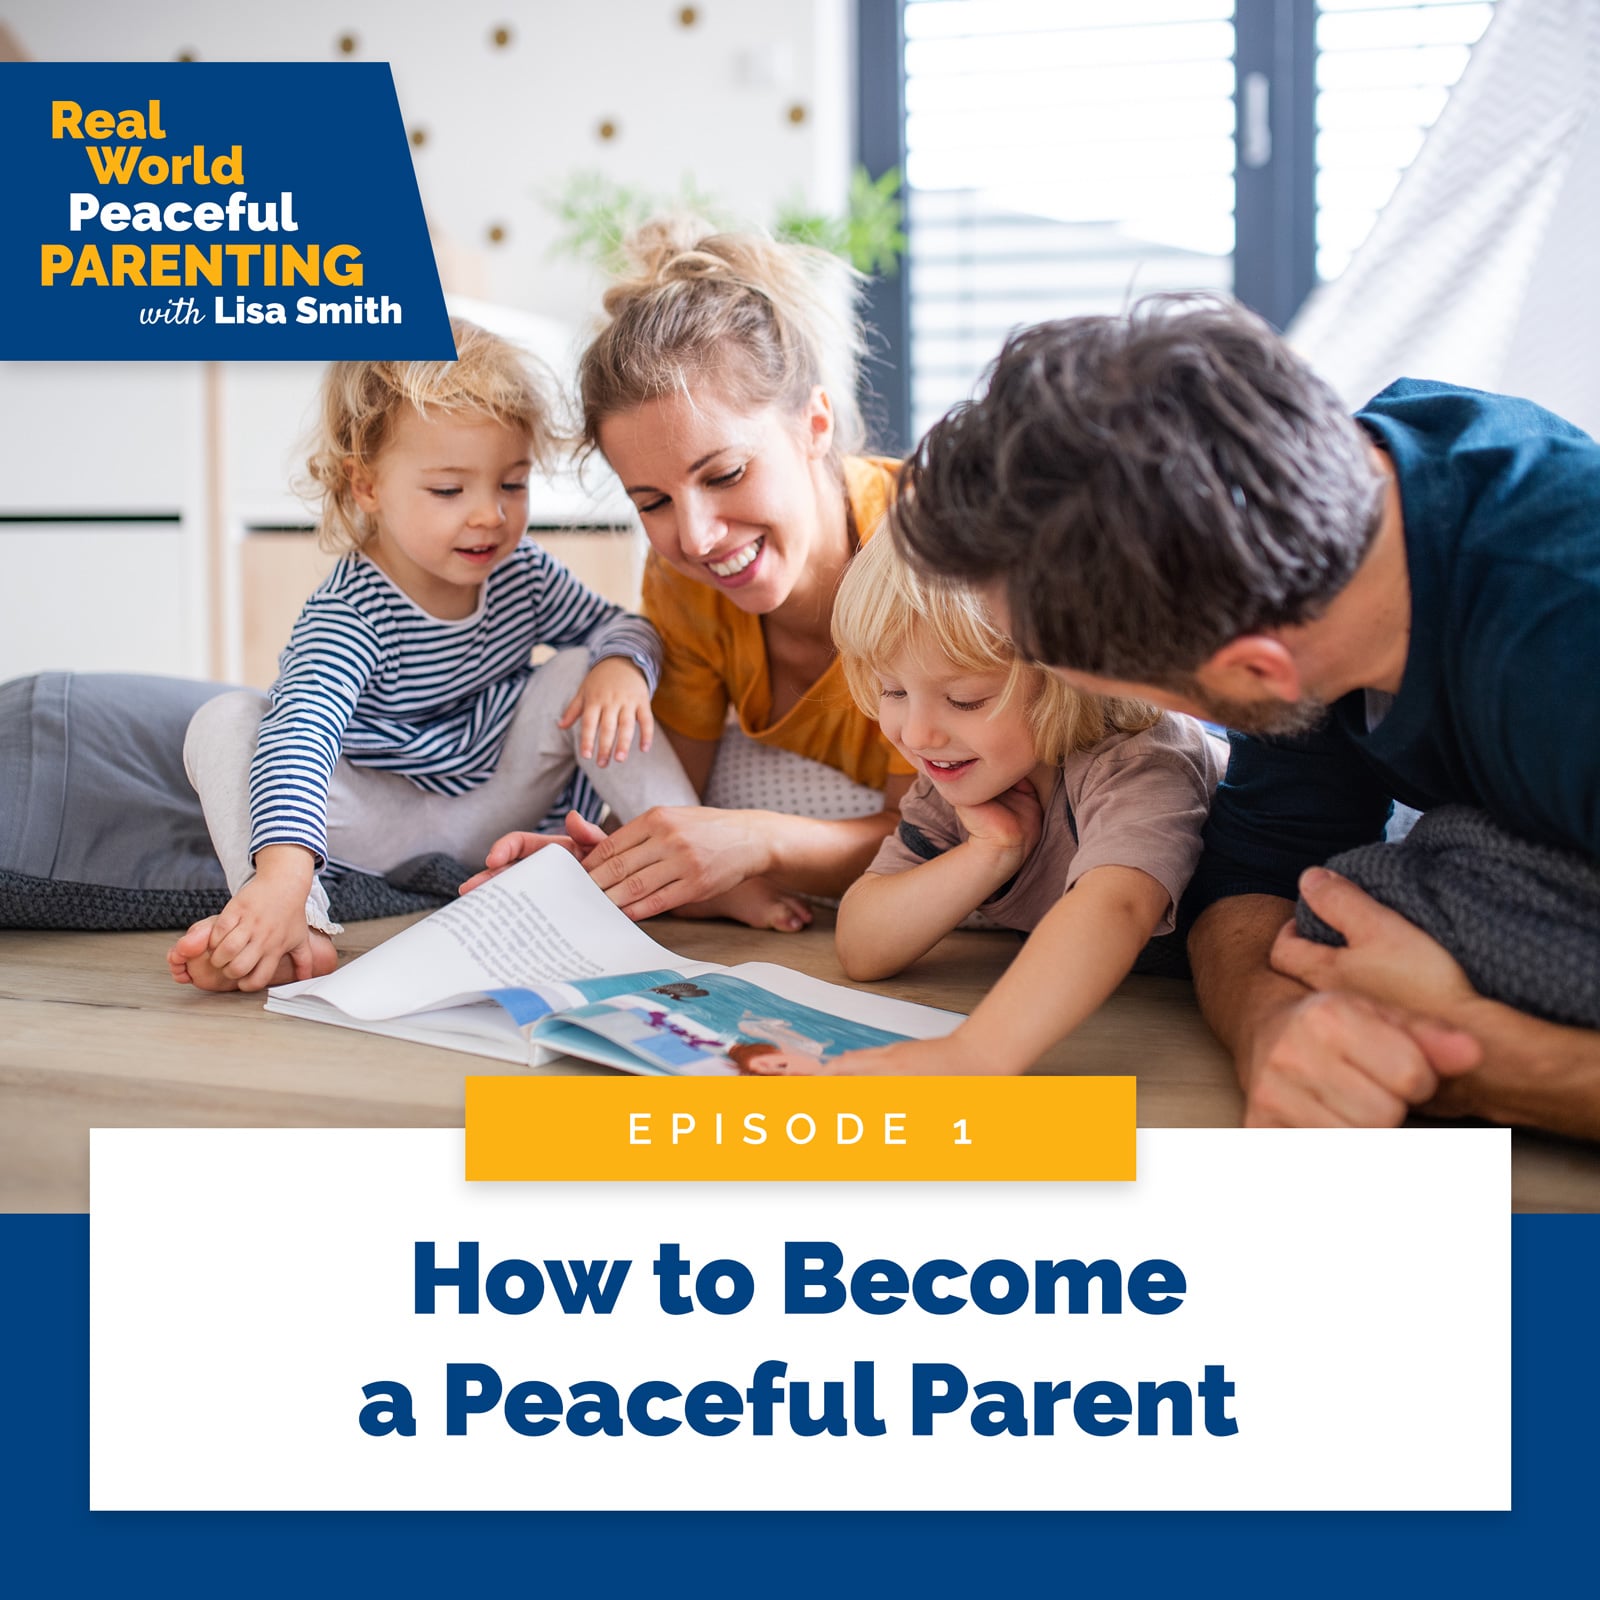 How to Become a Peaceful Parent